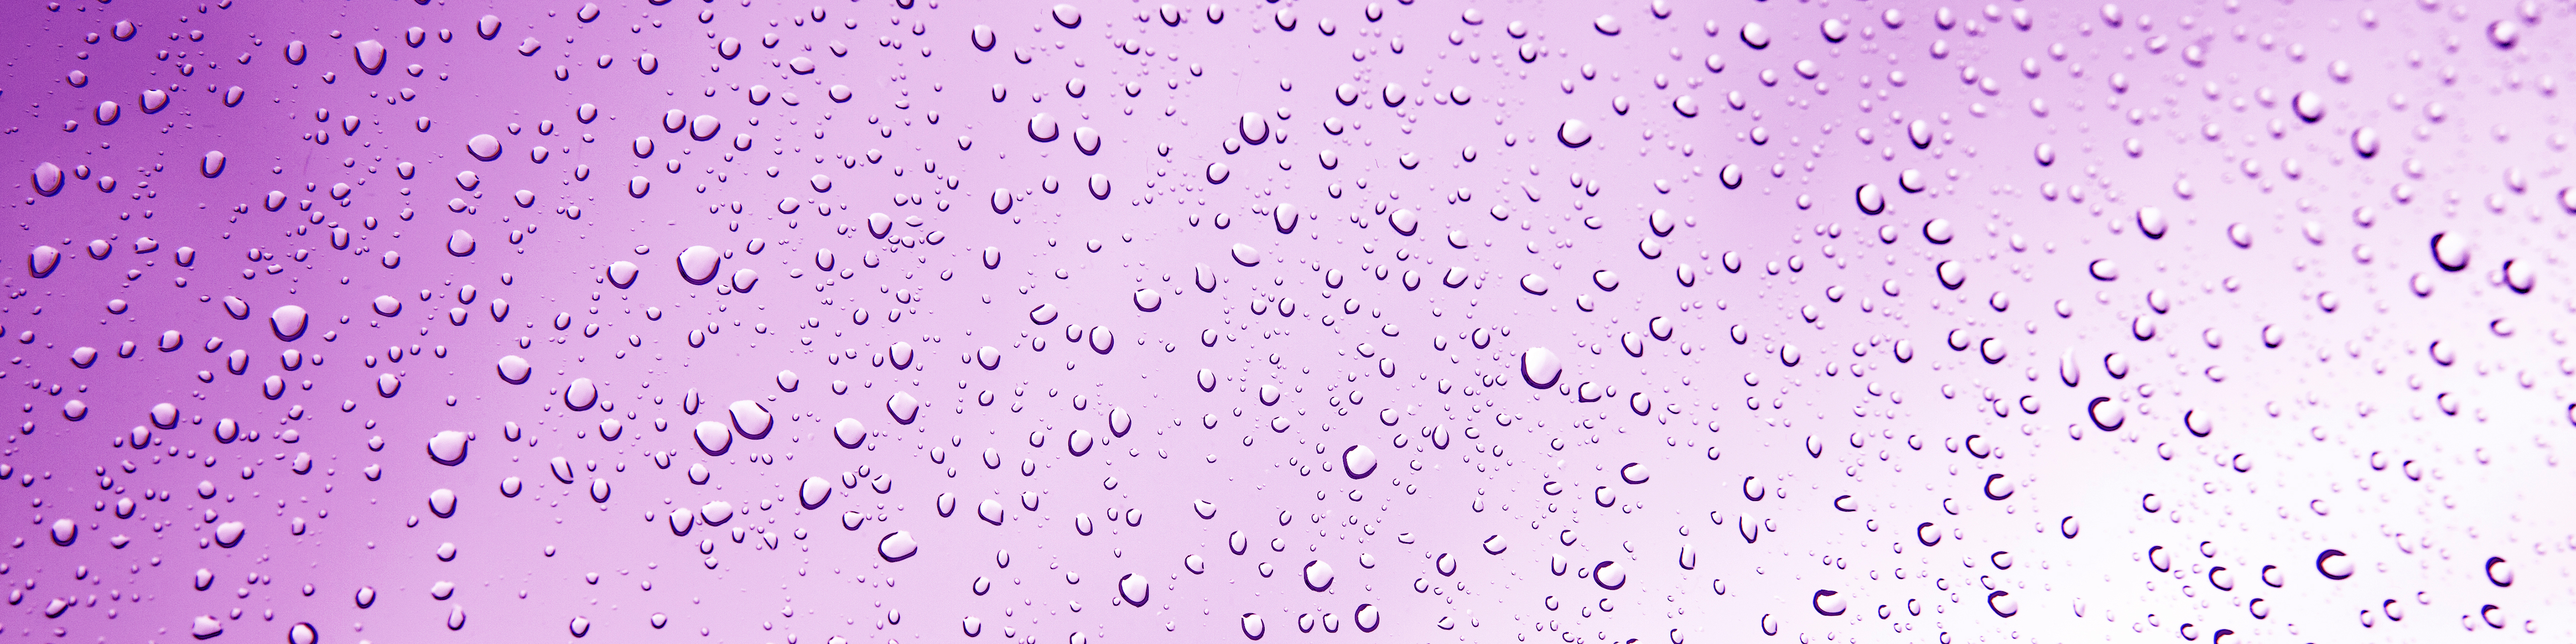 Water droplets on a purple background